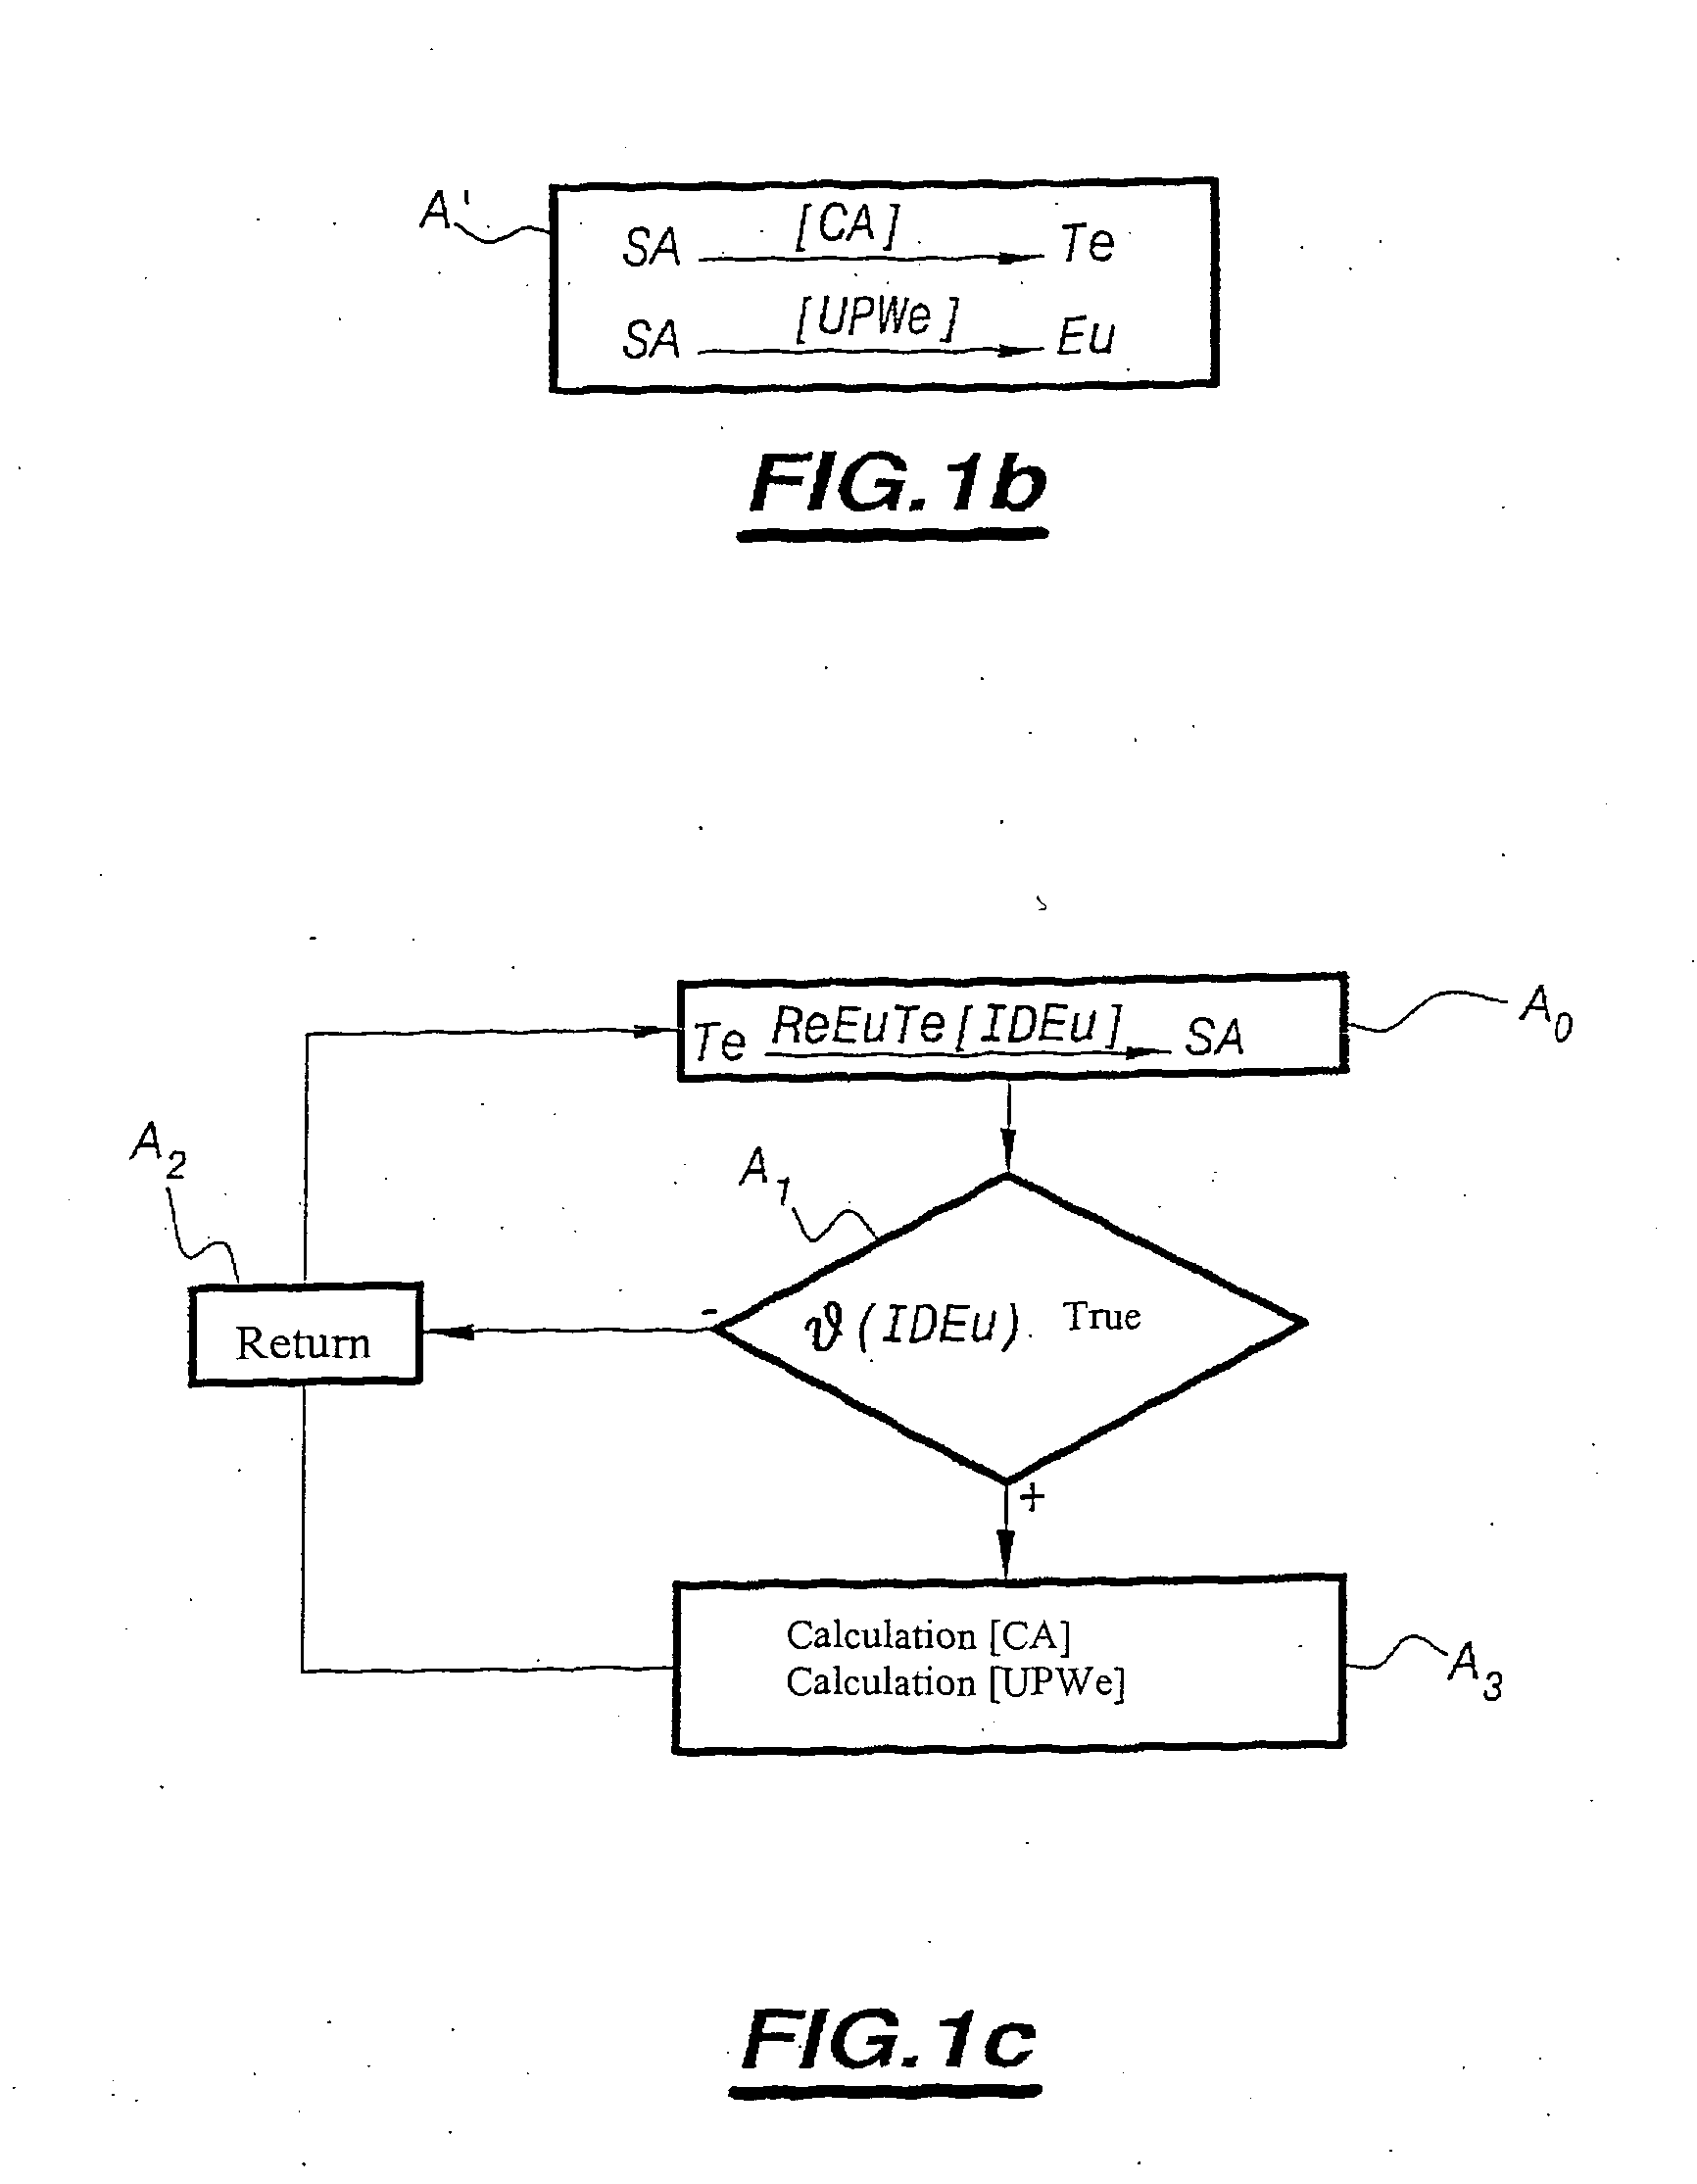 Method and system for electronic voting over a high-security network